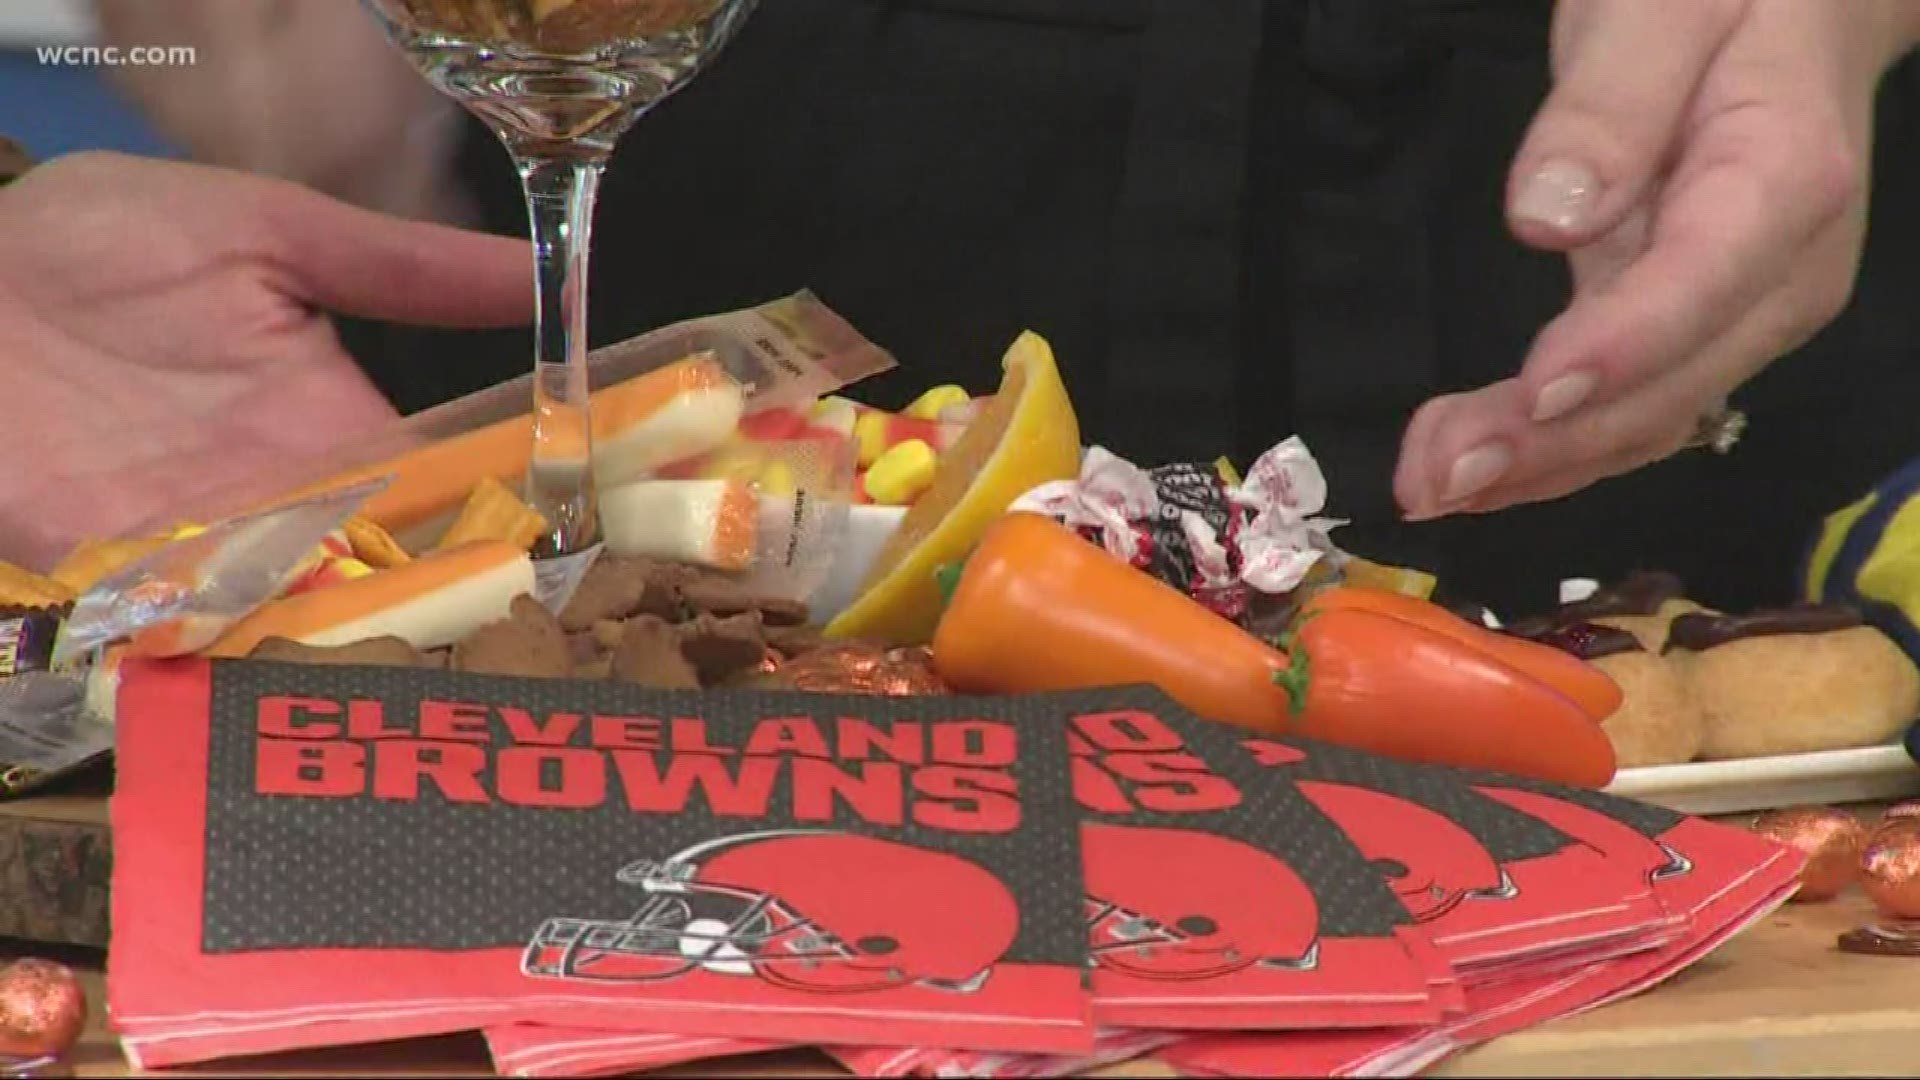 Jill Aker Ray shows us how you can make a fun snack board using your favorite team’s colors.